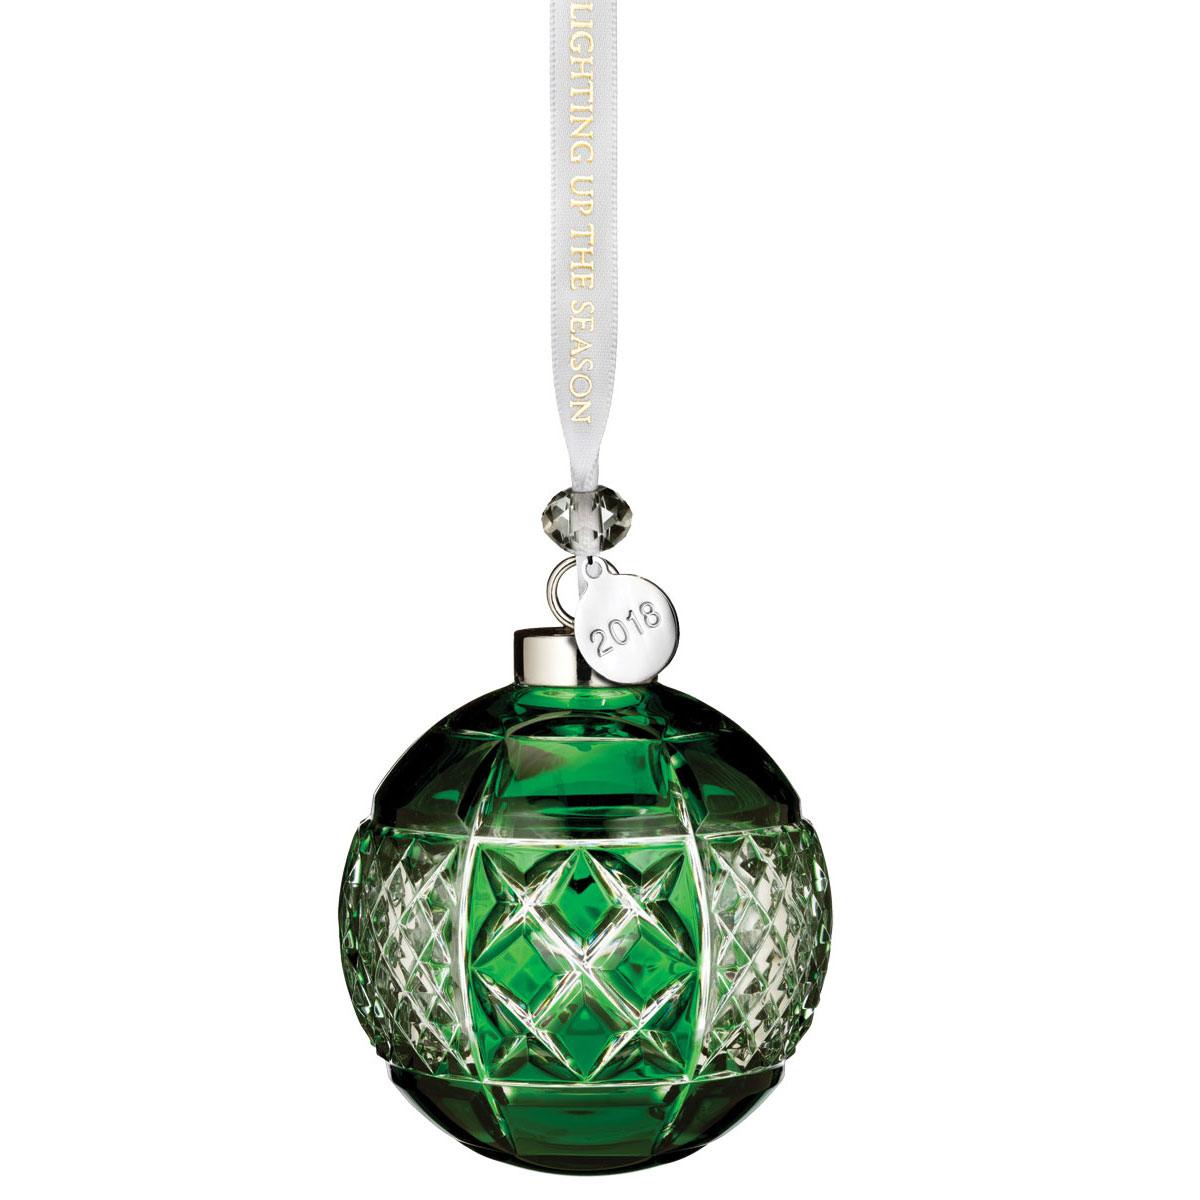 Waterford Crystal 2018 Emerald Ball Ornament